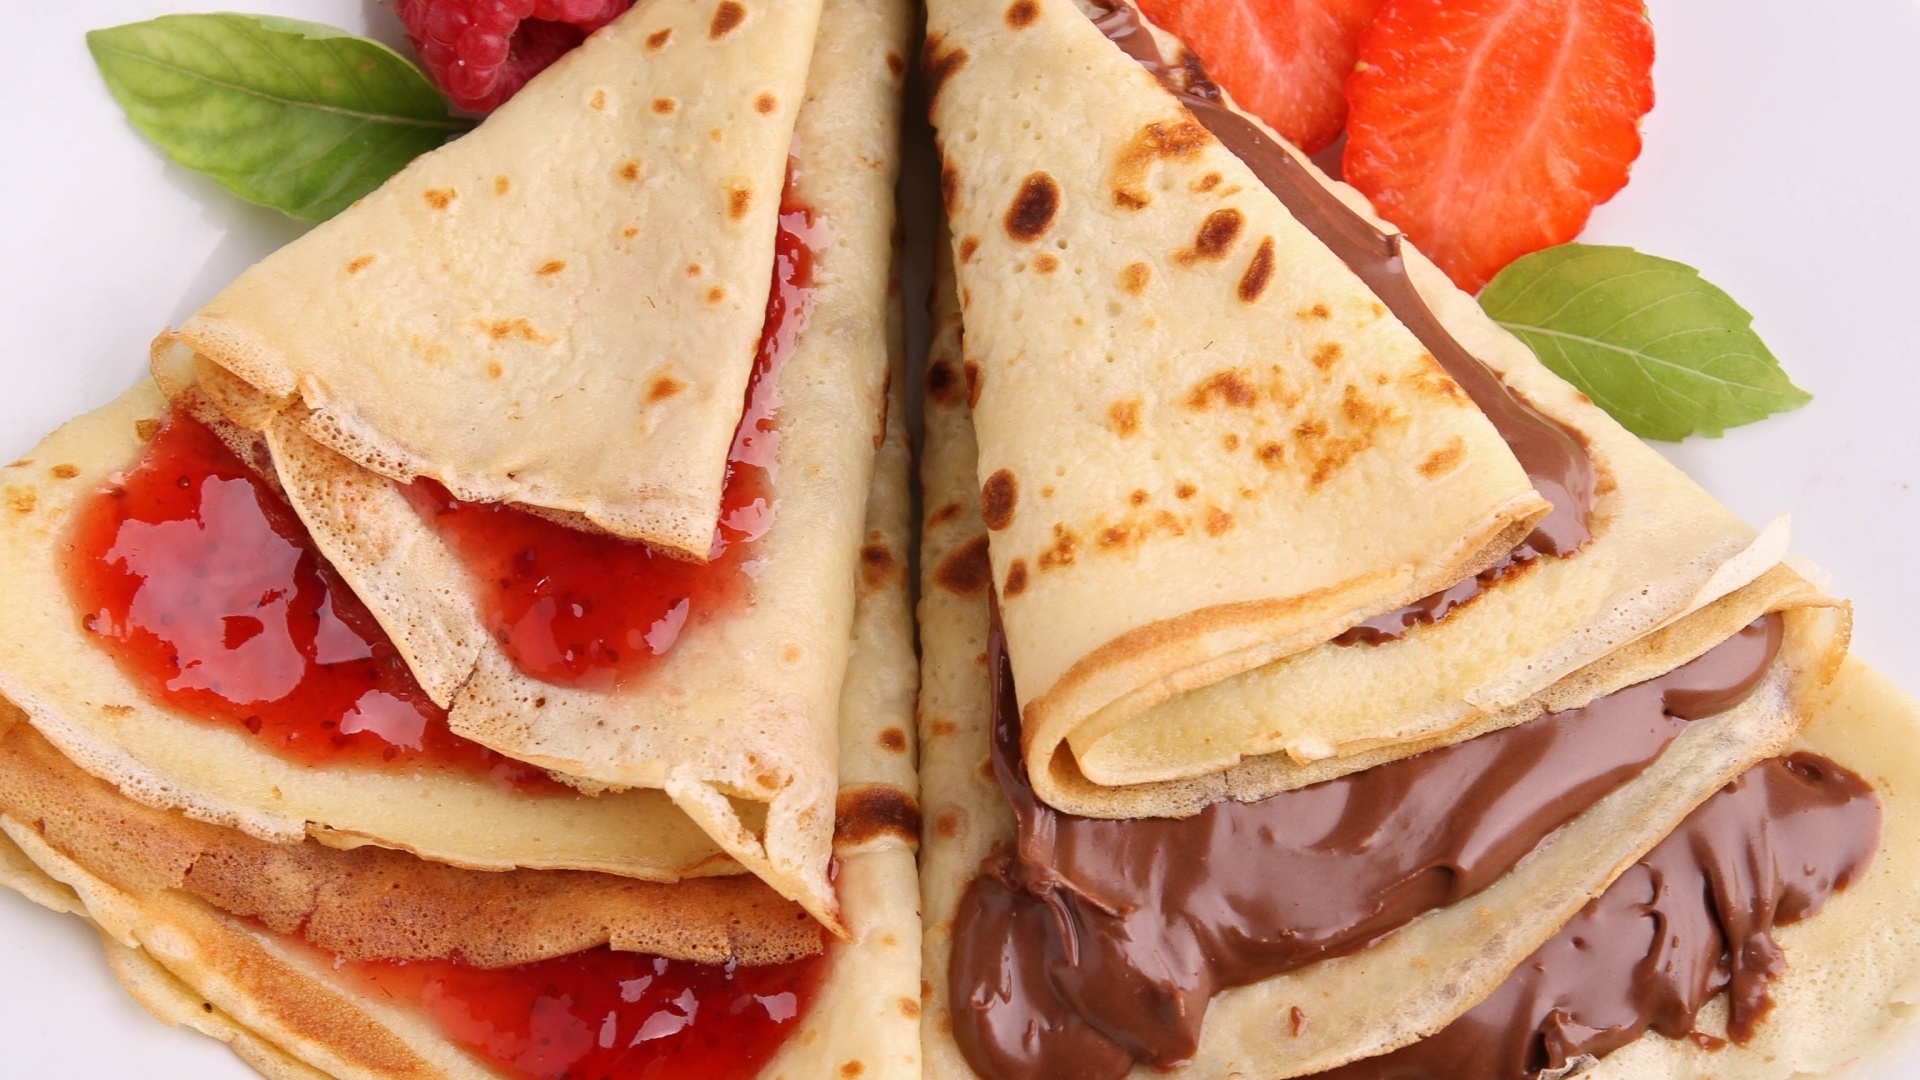 Das Most delicious pancakes with jam Wallpaper 1920x1080